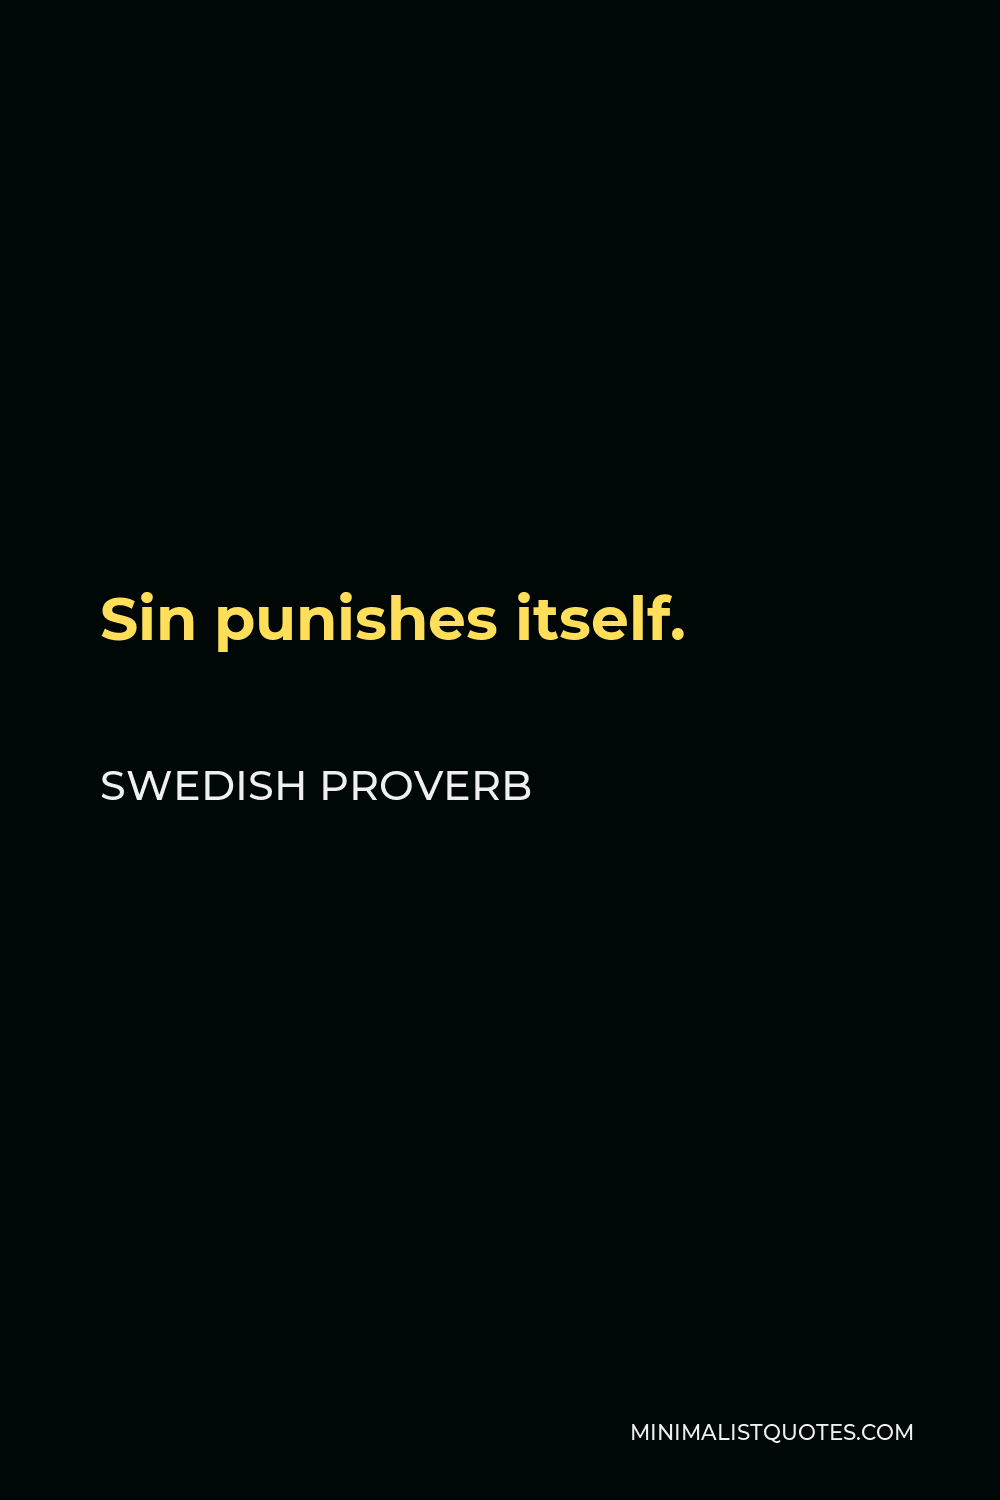 Swedish Proverb Quote - Sin punishes itself.